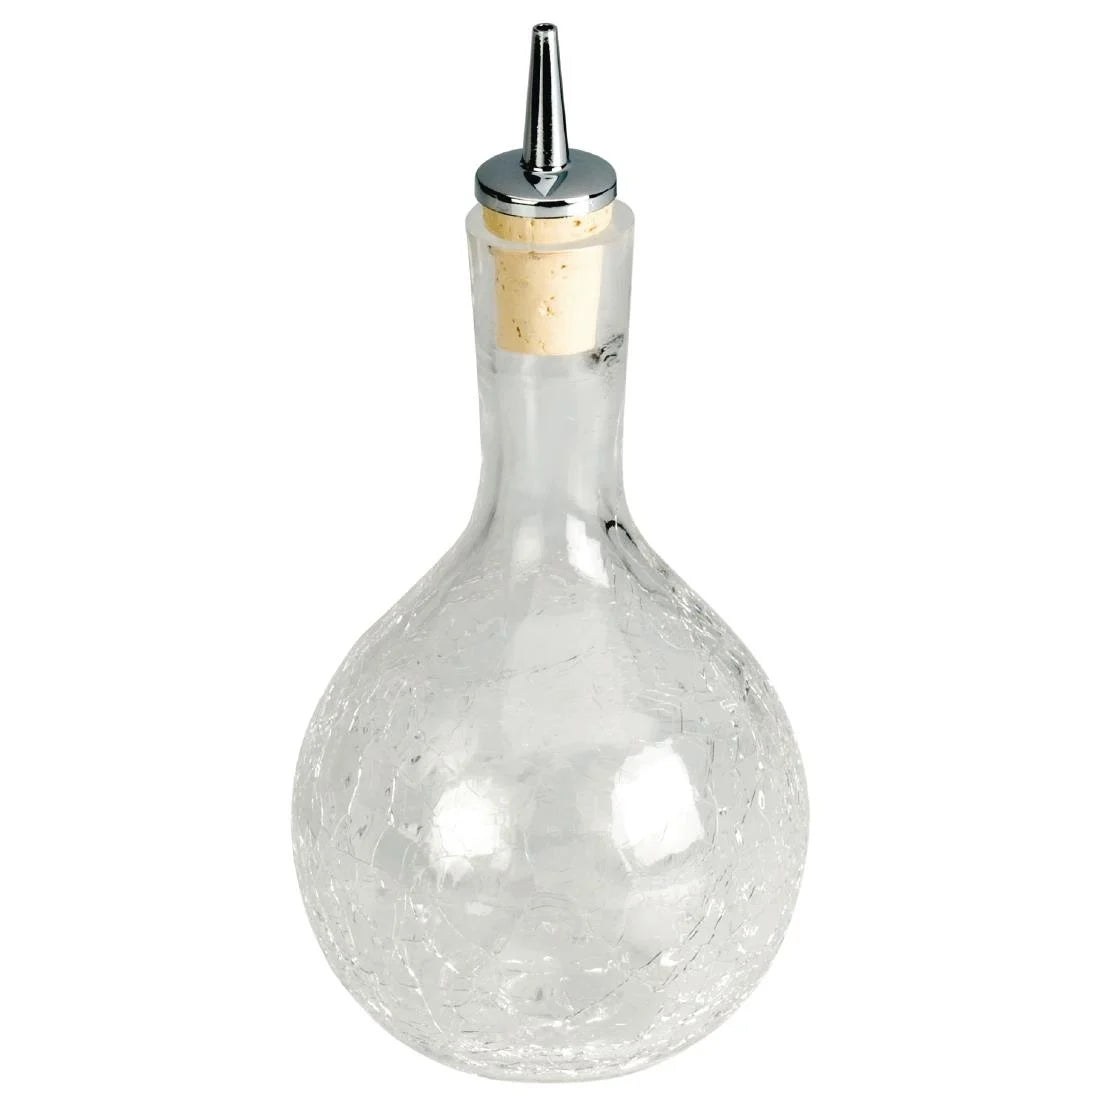 Bitters Dash Bottle Round Crackle Glass 330ml JD Catering Equipment Solutions Ltd